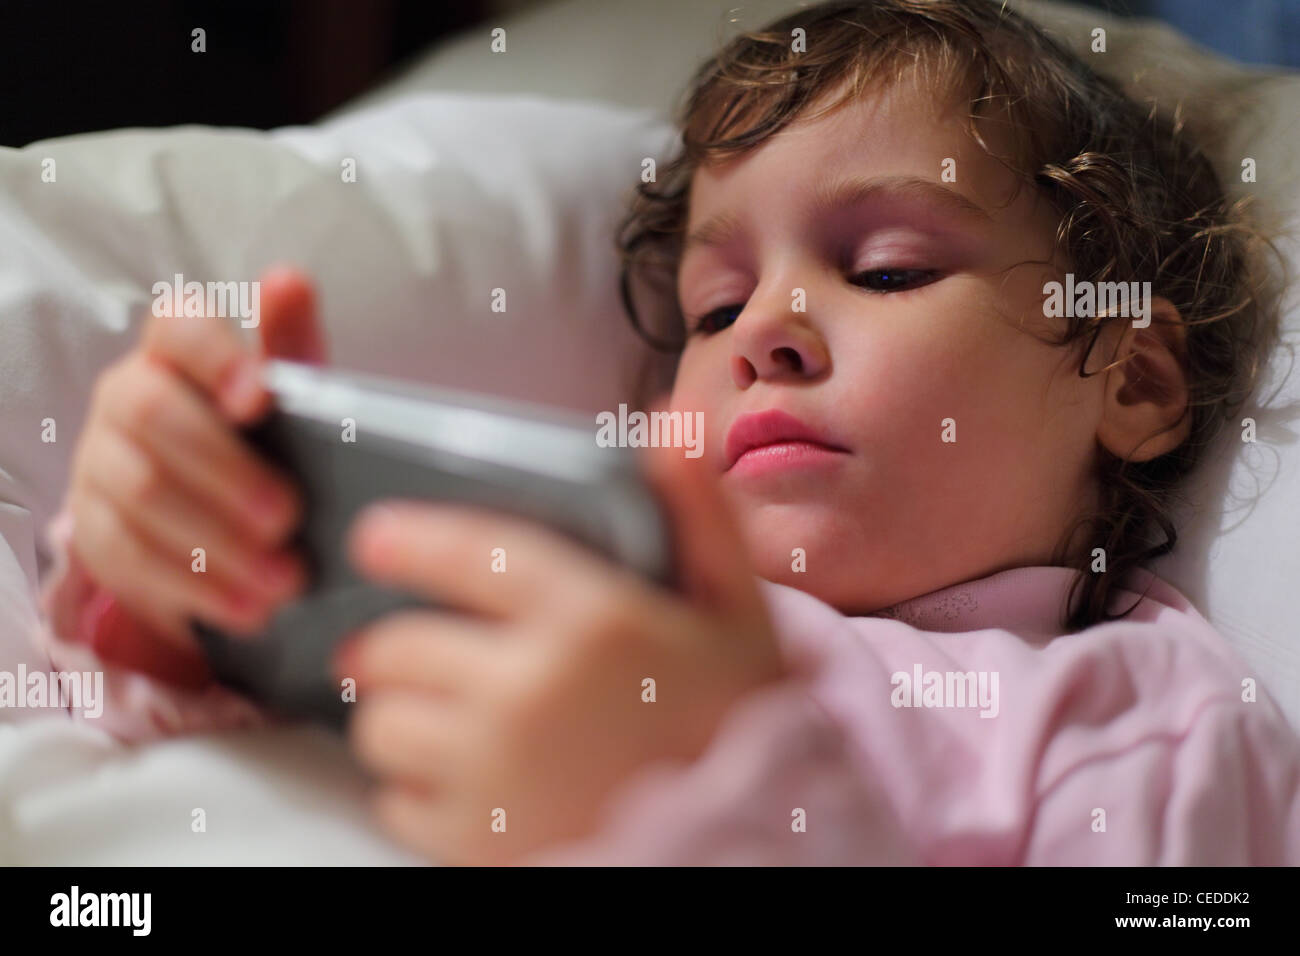 Little girl in bed with hendheld computer Stock Photo